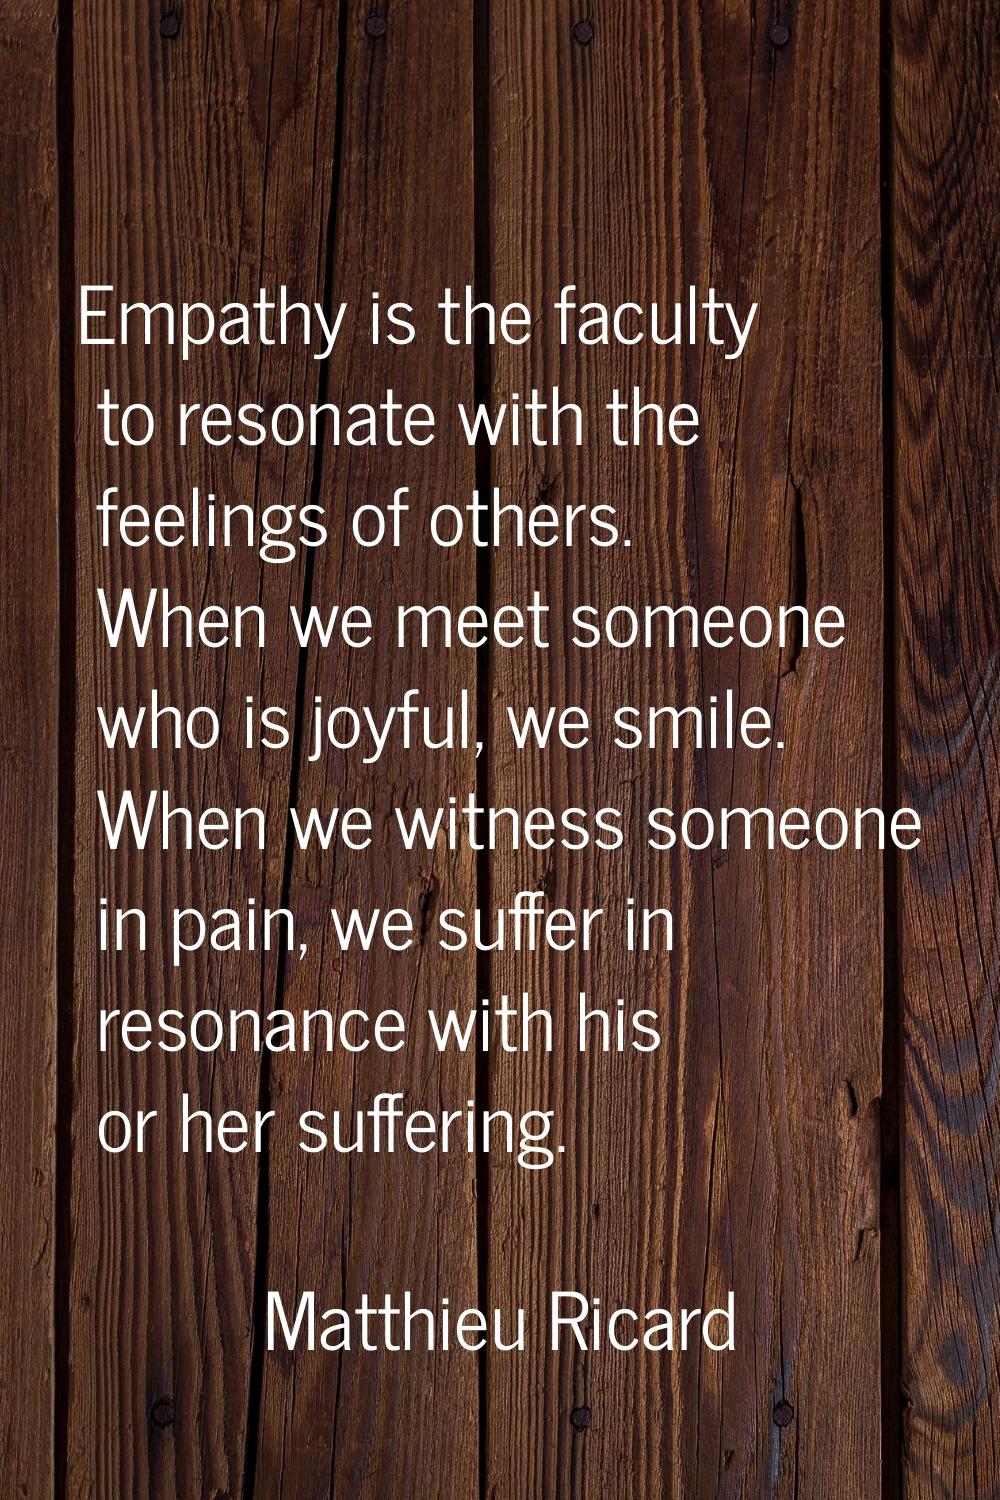 Empathy is the faculty to resonate with the feelings of others. When we meet someone who is joyful,